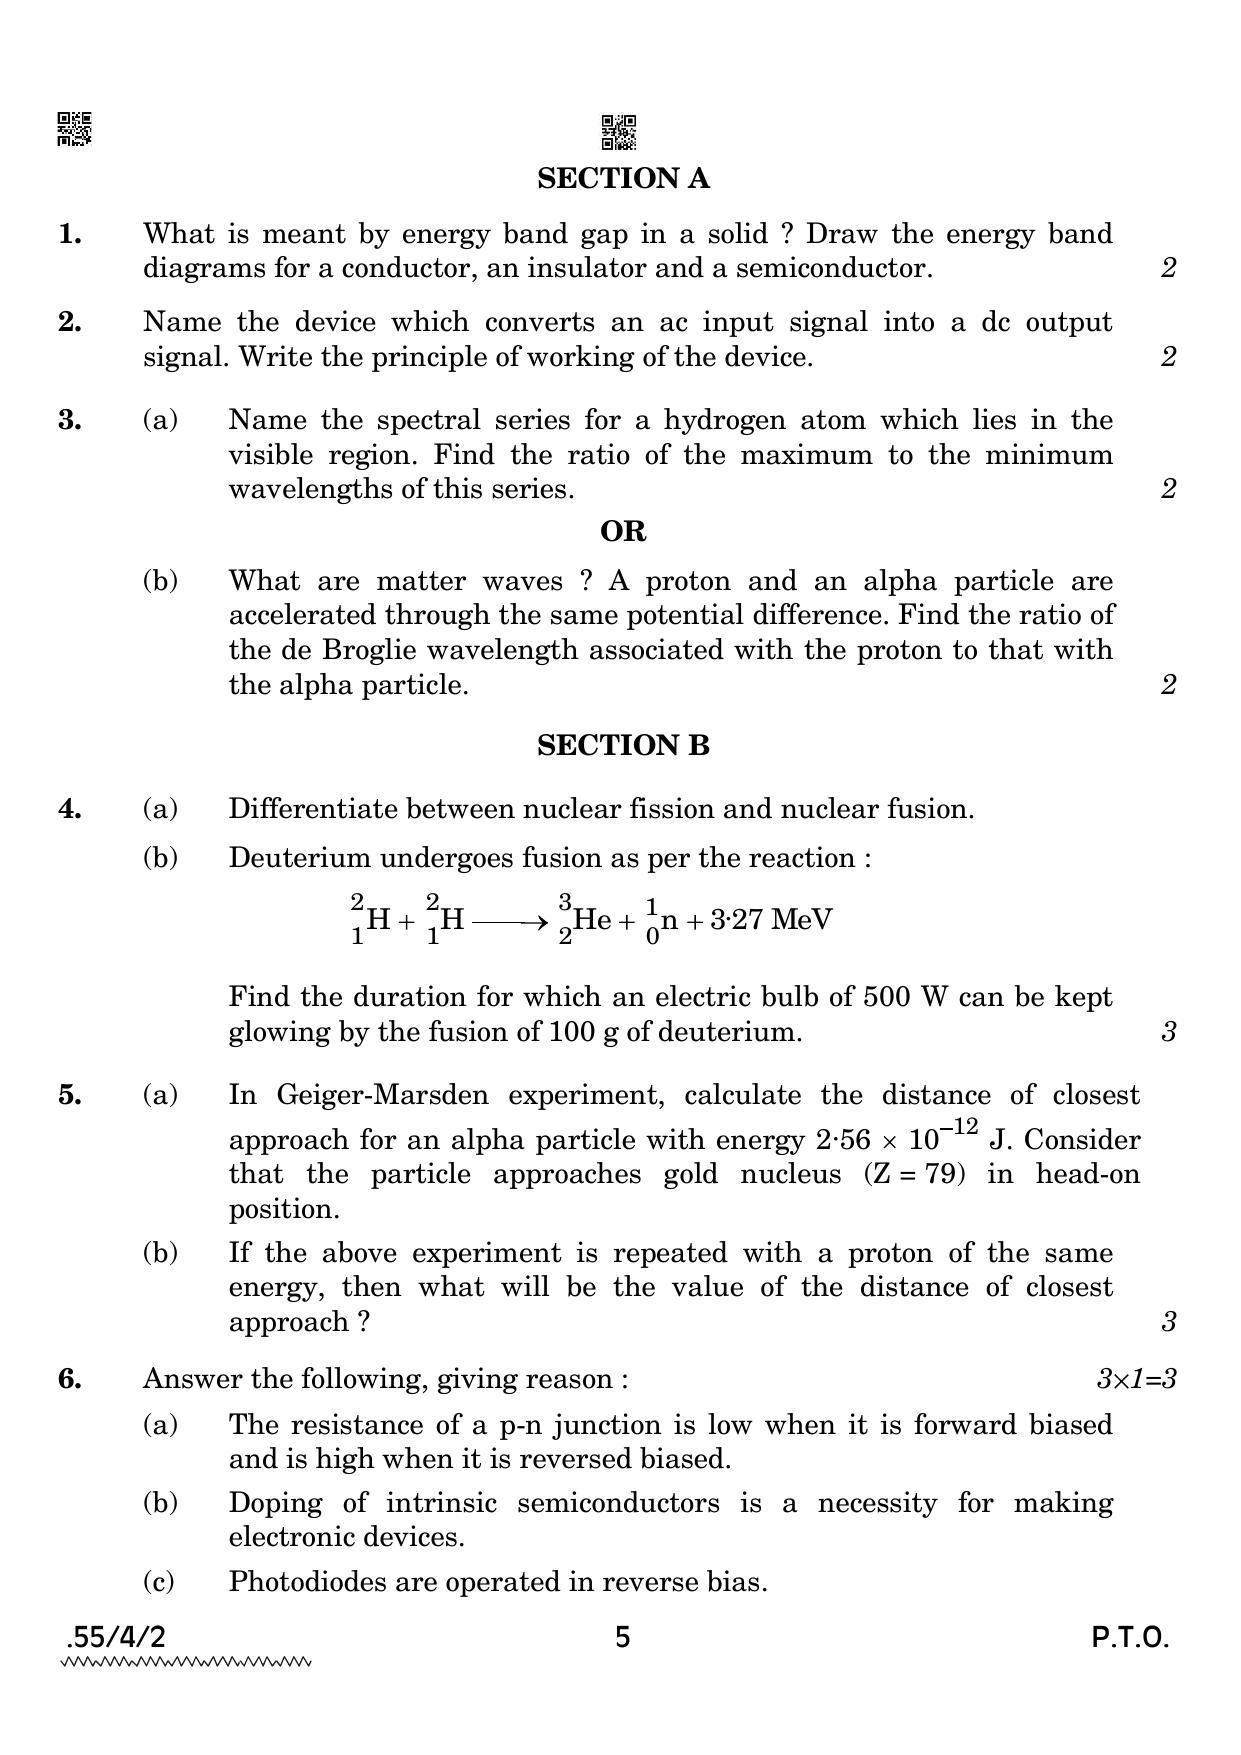 CBSE Class 12 55-4-2 Physics 2022 Question Paper - Page 5